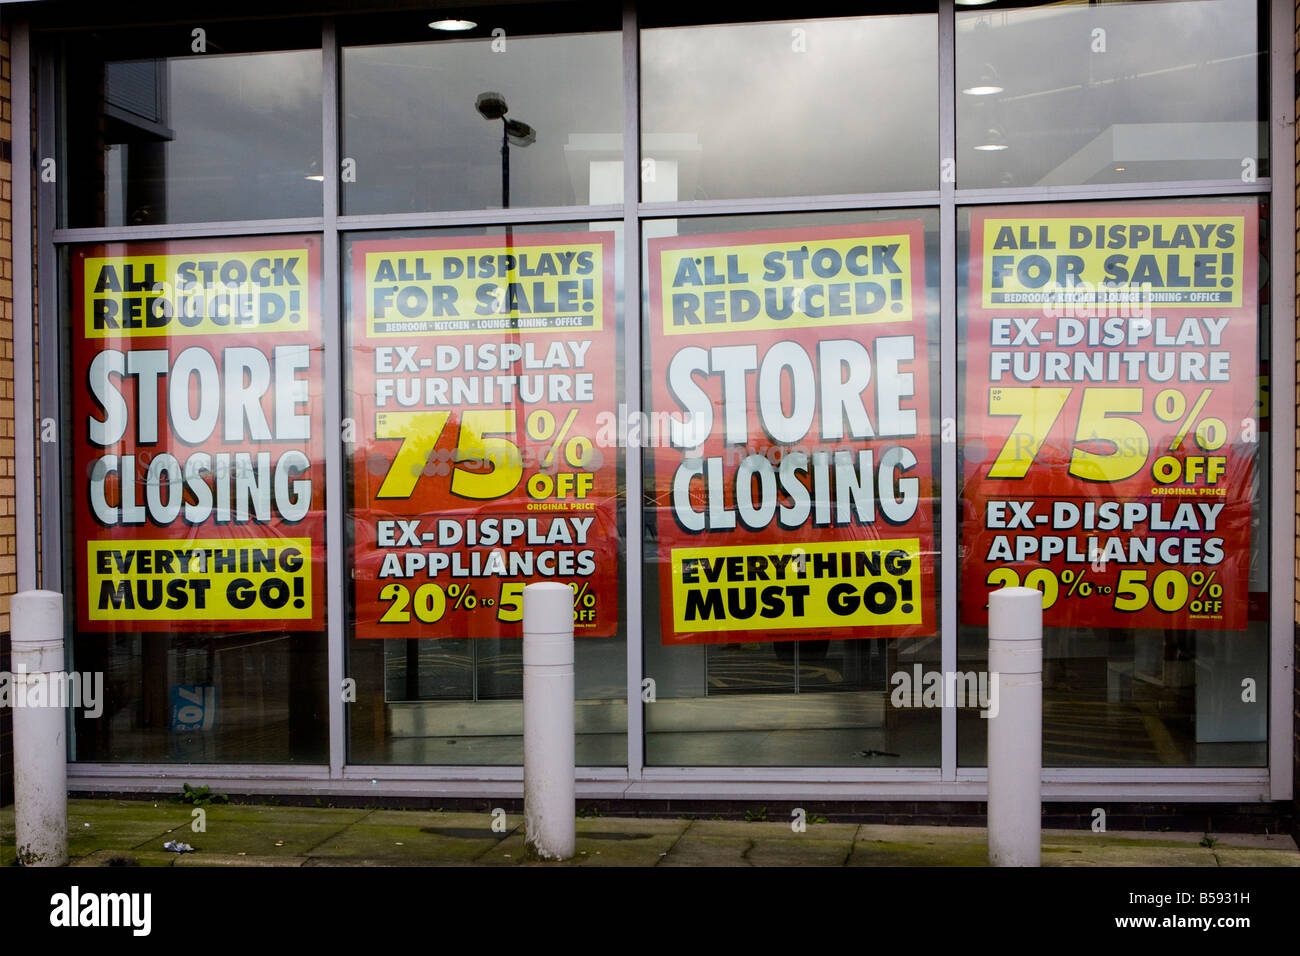 Store closure 75% off banners advertising MFI Oldham Manchester store closing closer view Stock Photo